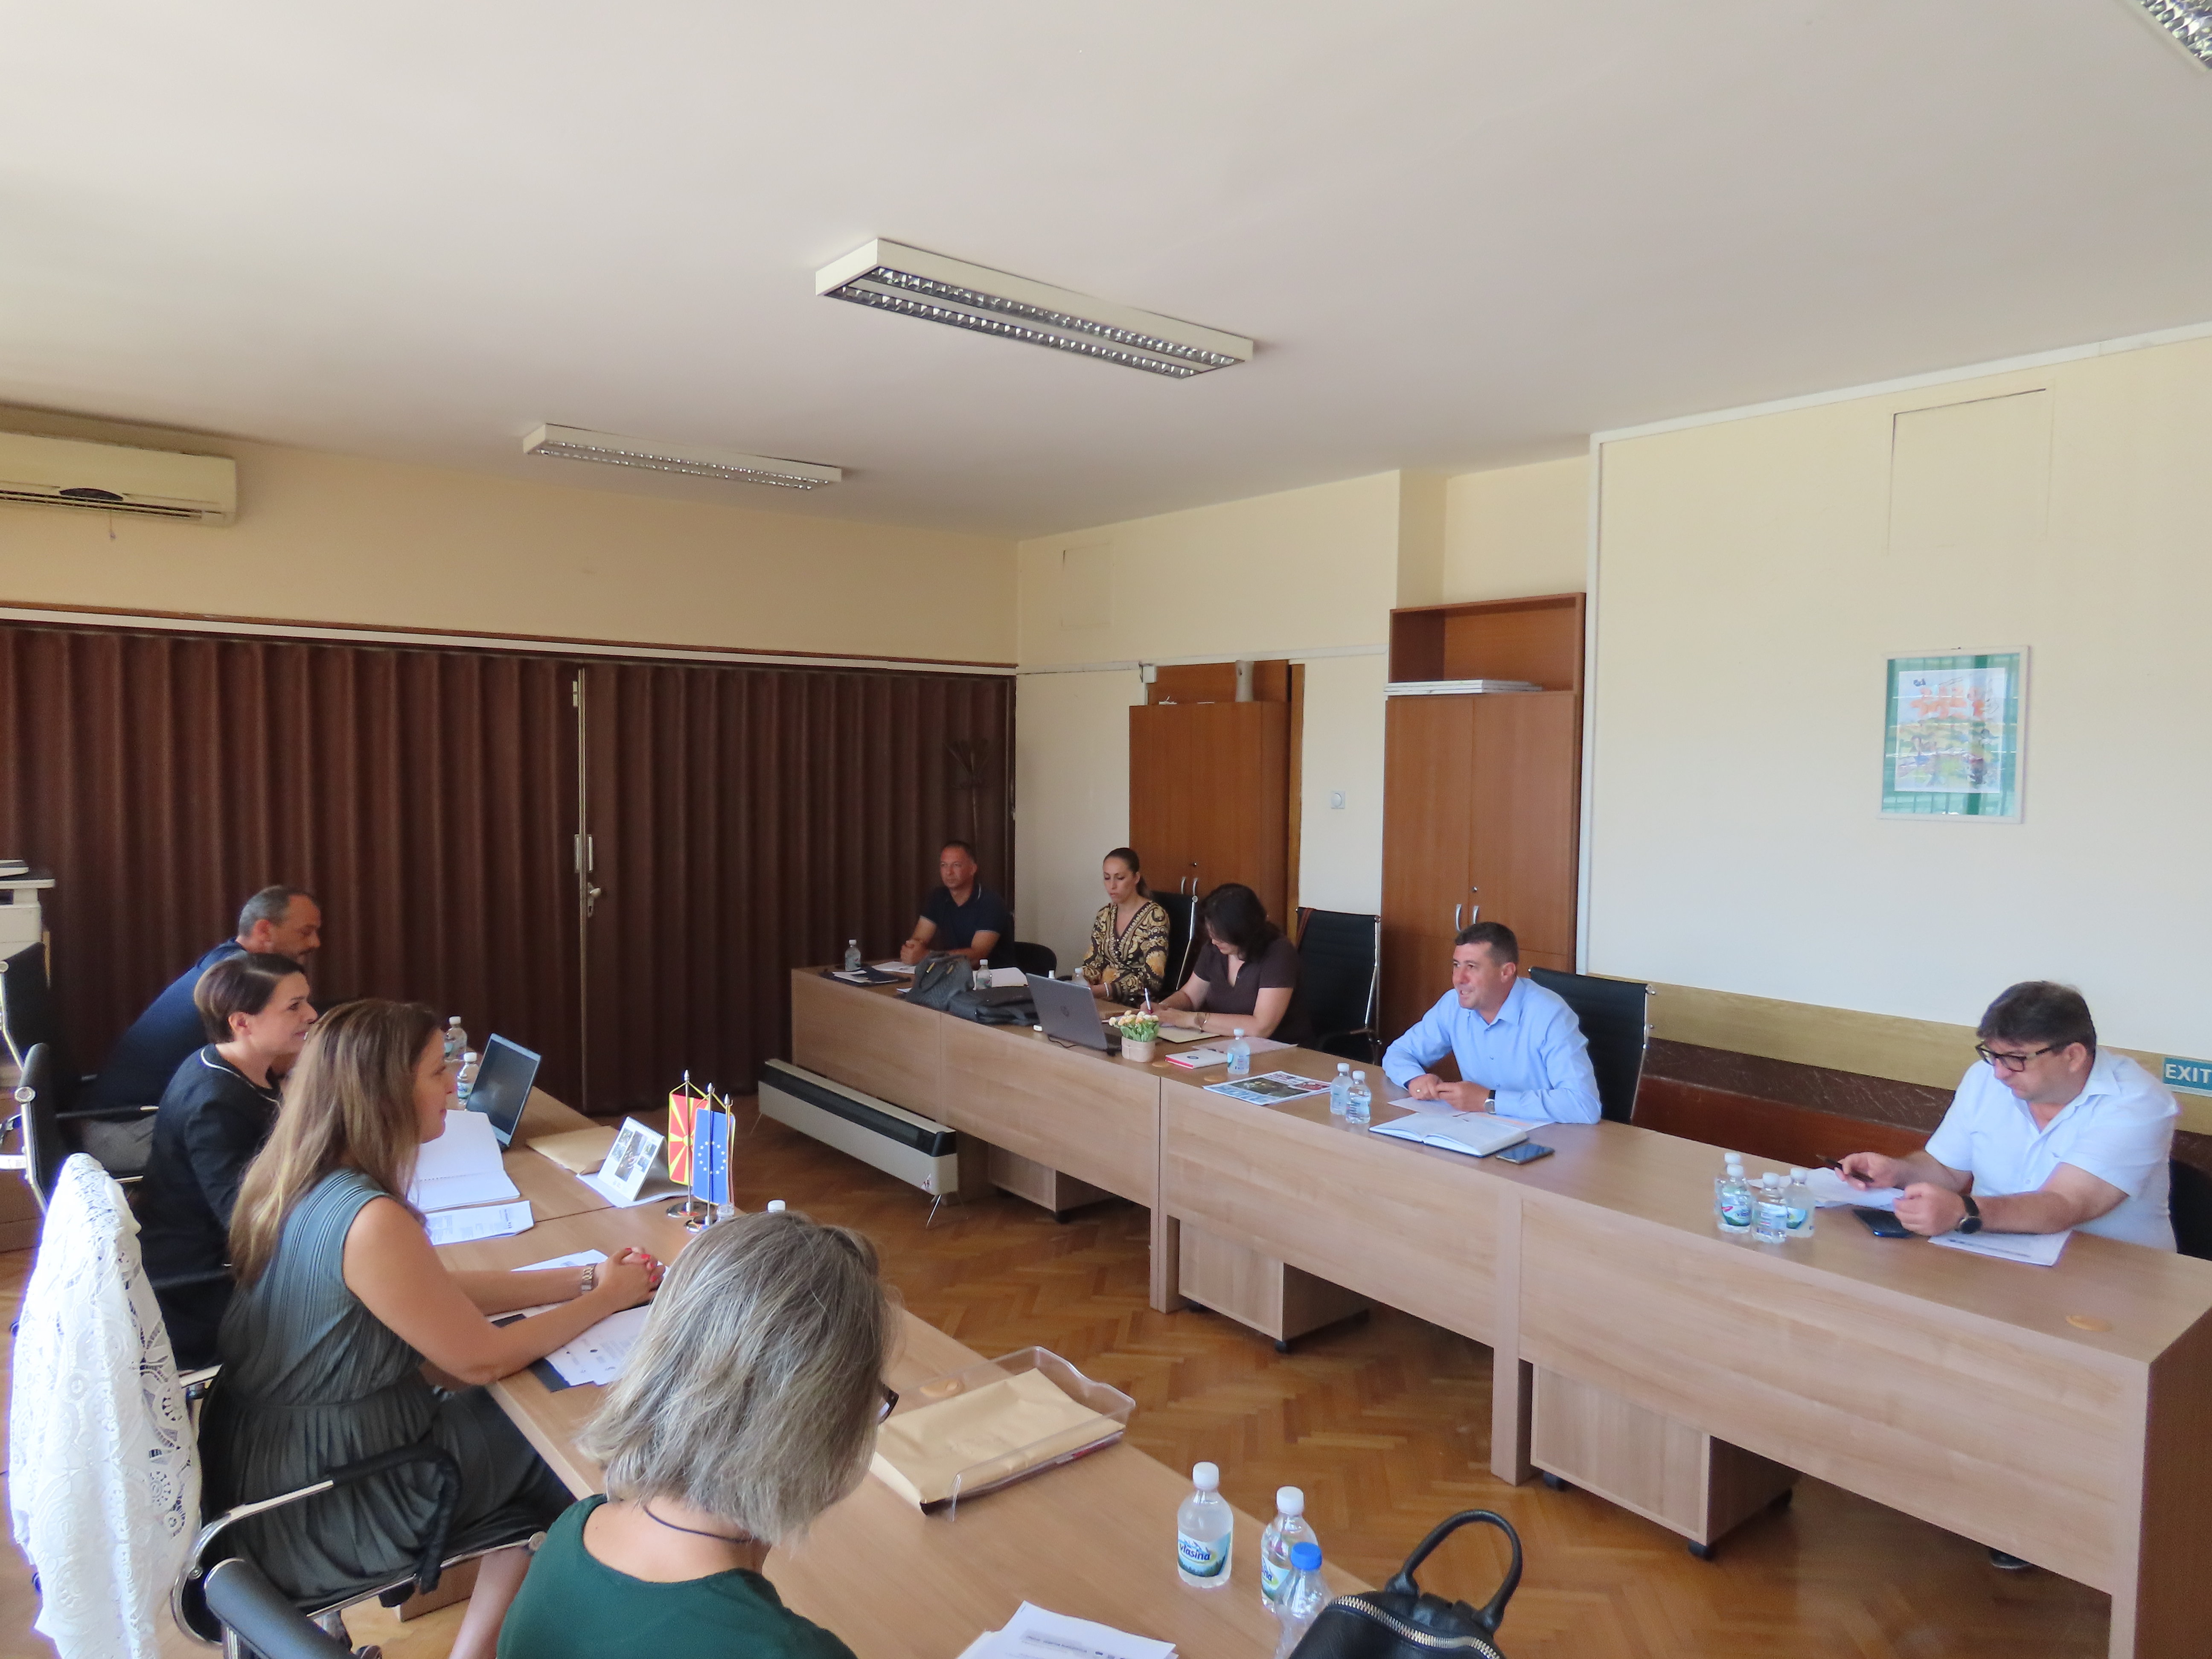 RS-MK cross-border initiative on opportunities for economic empowerment tailored to 5 municipalities in Serbia and North Macedonia